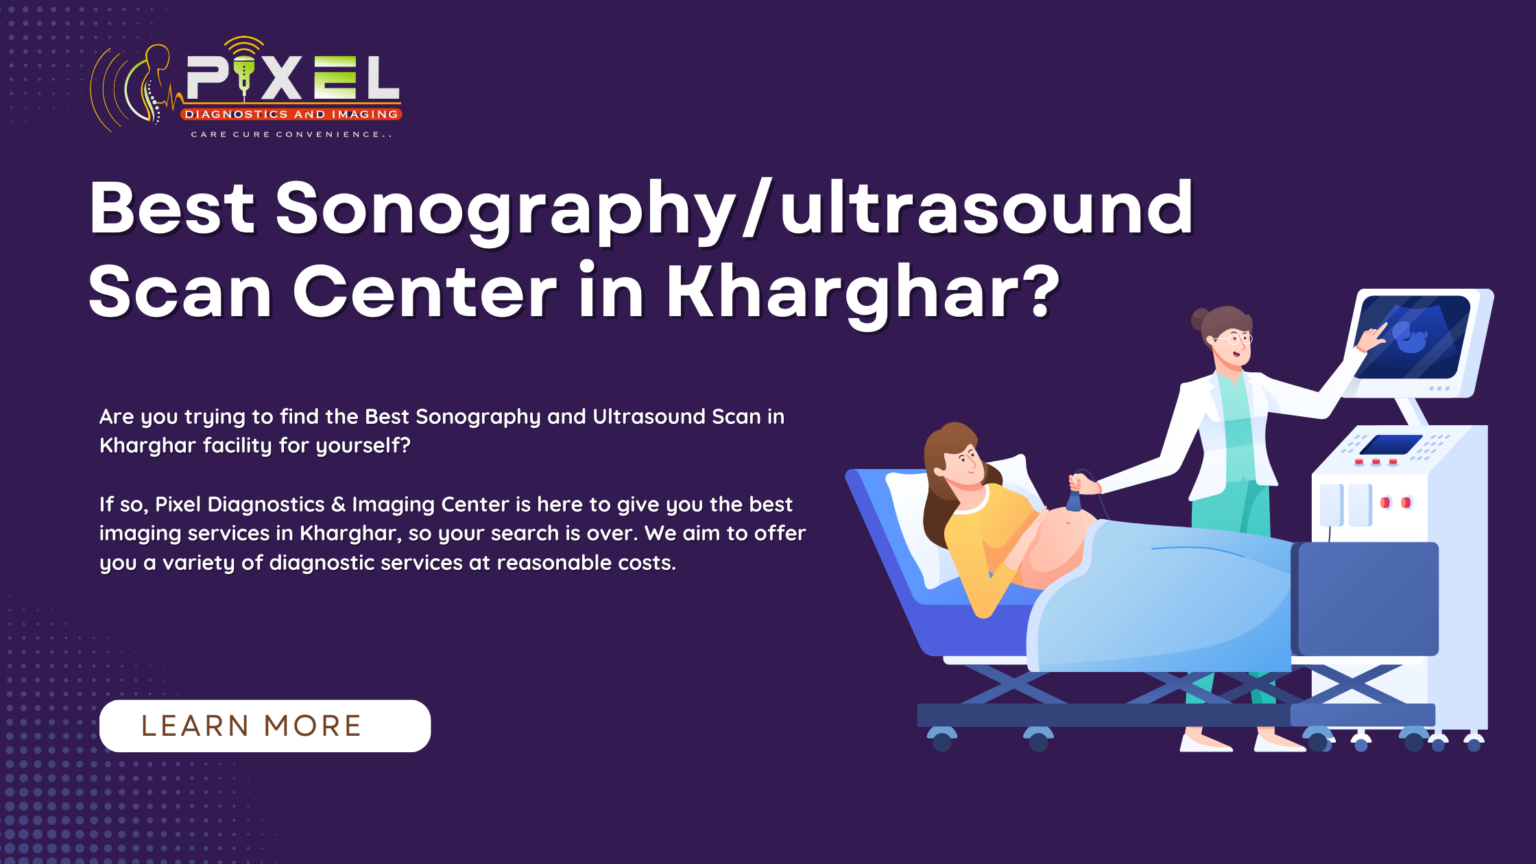 Pixel-Diagnostics-Imaging-Center-Sonography-and-ultrasound-Scan-Center-in-Kharghar